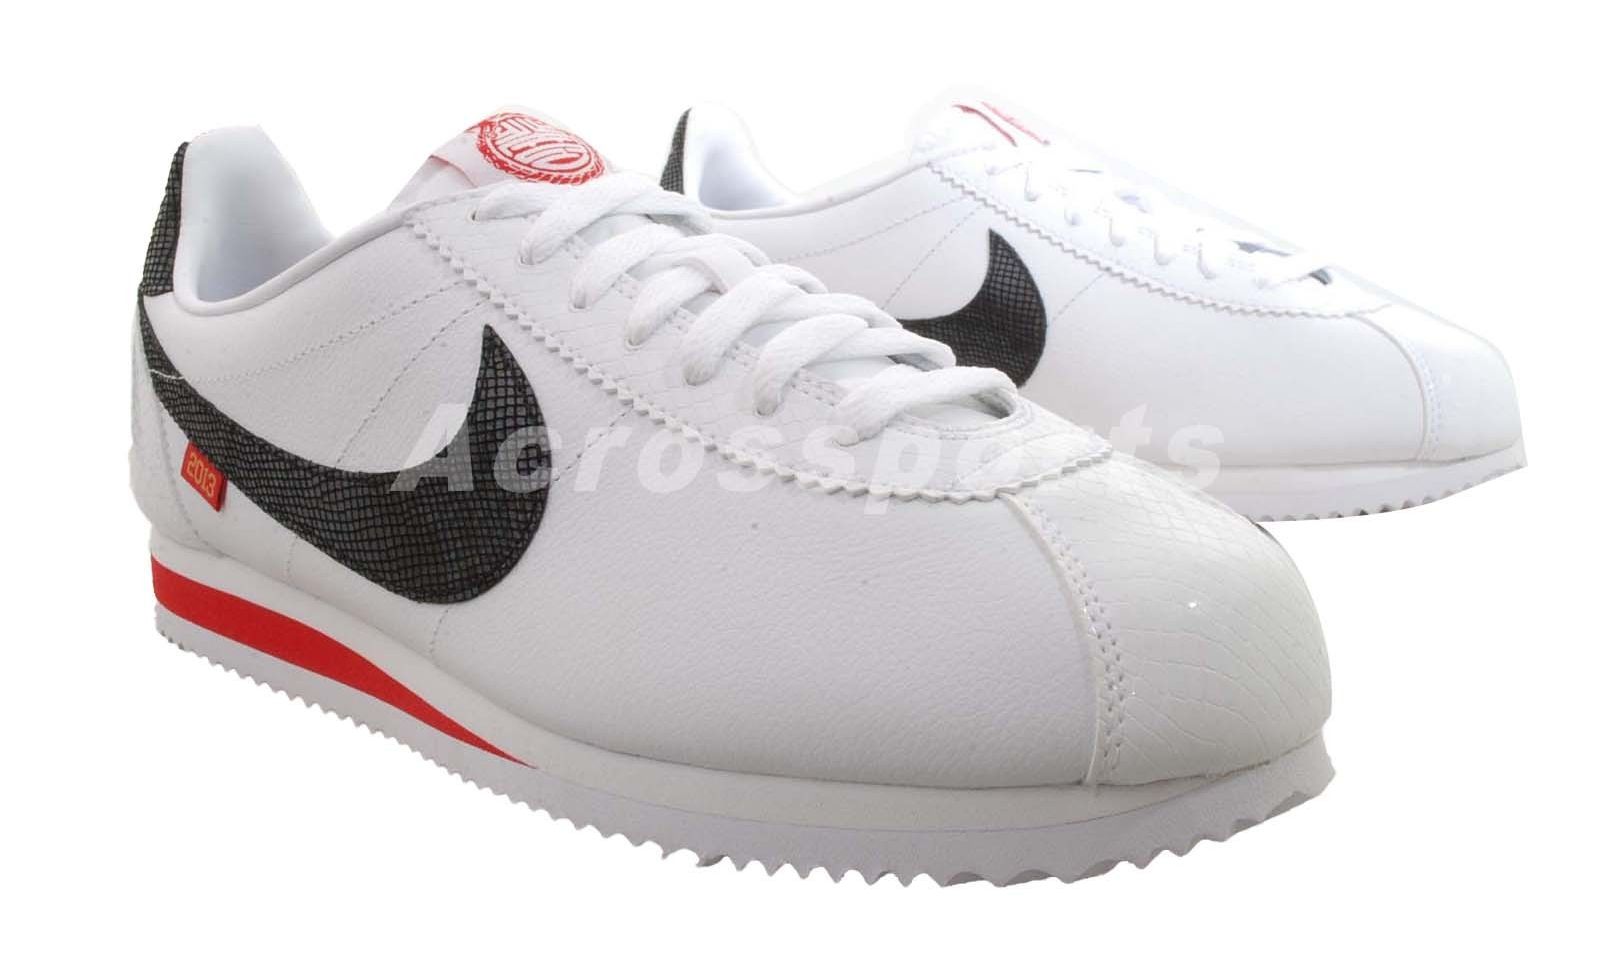 Nike Cortez Year Of The Snake 04